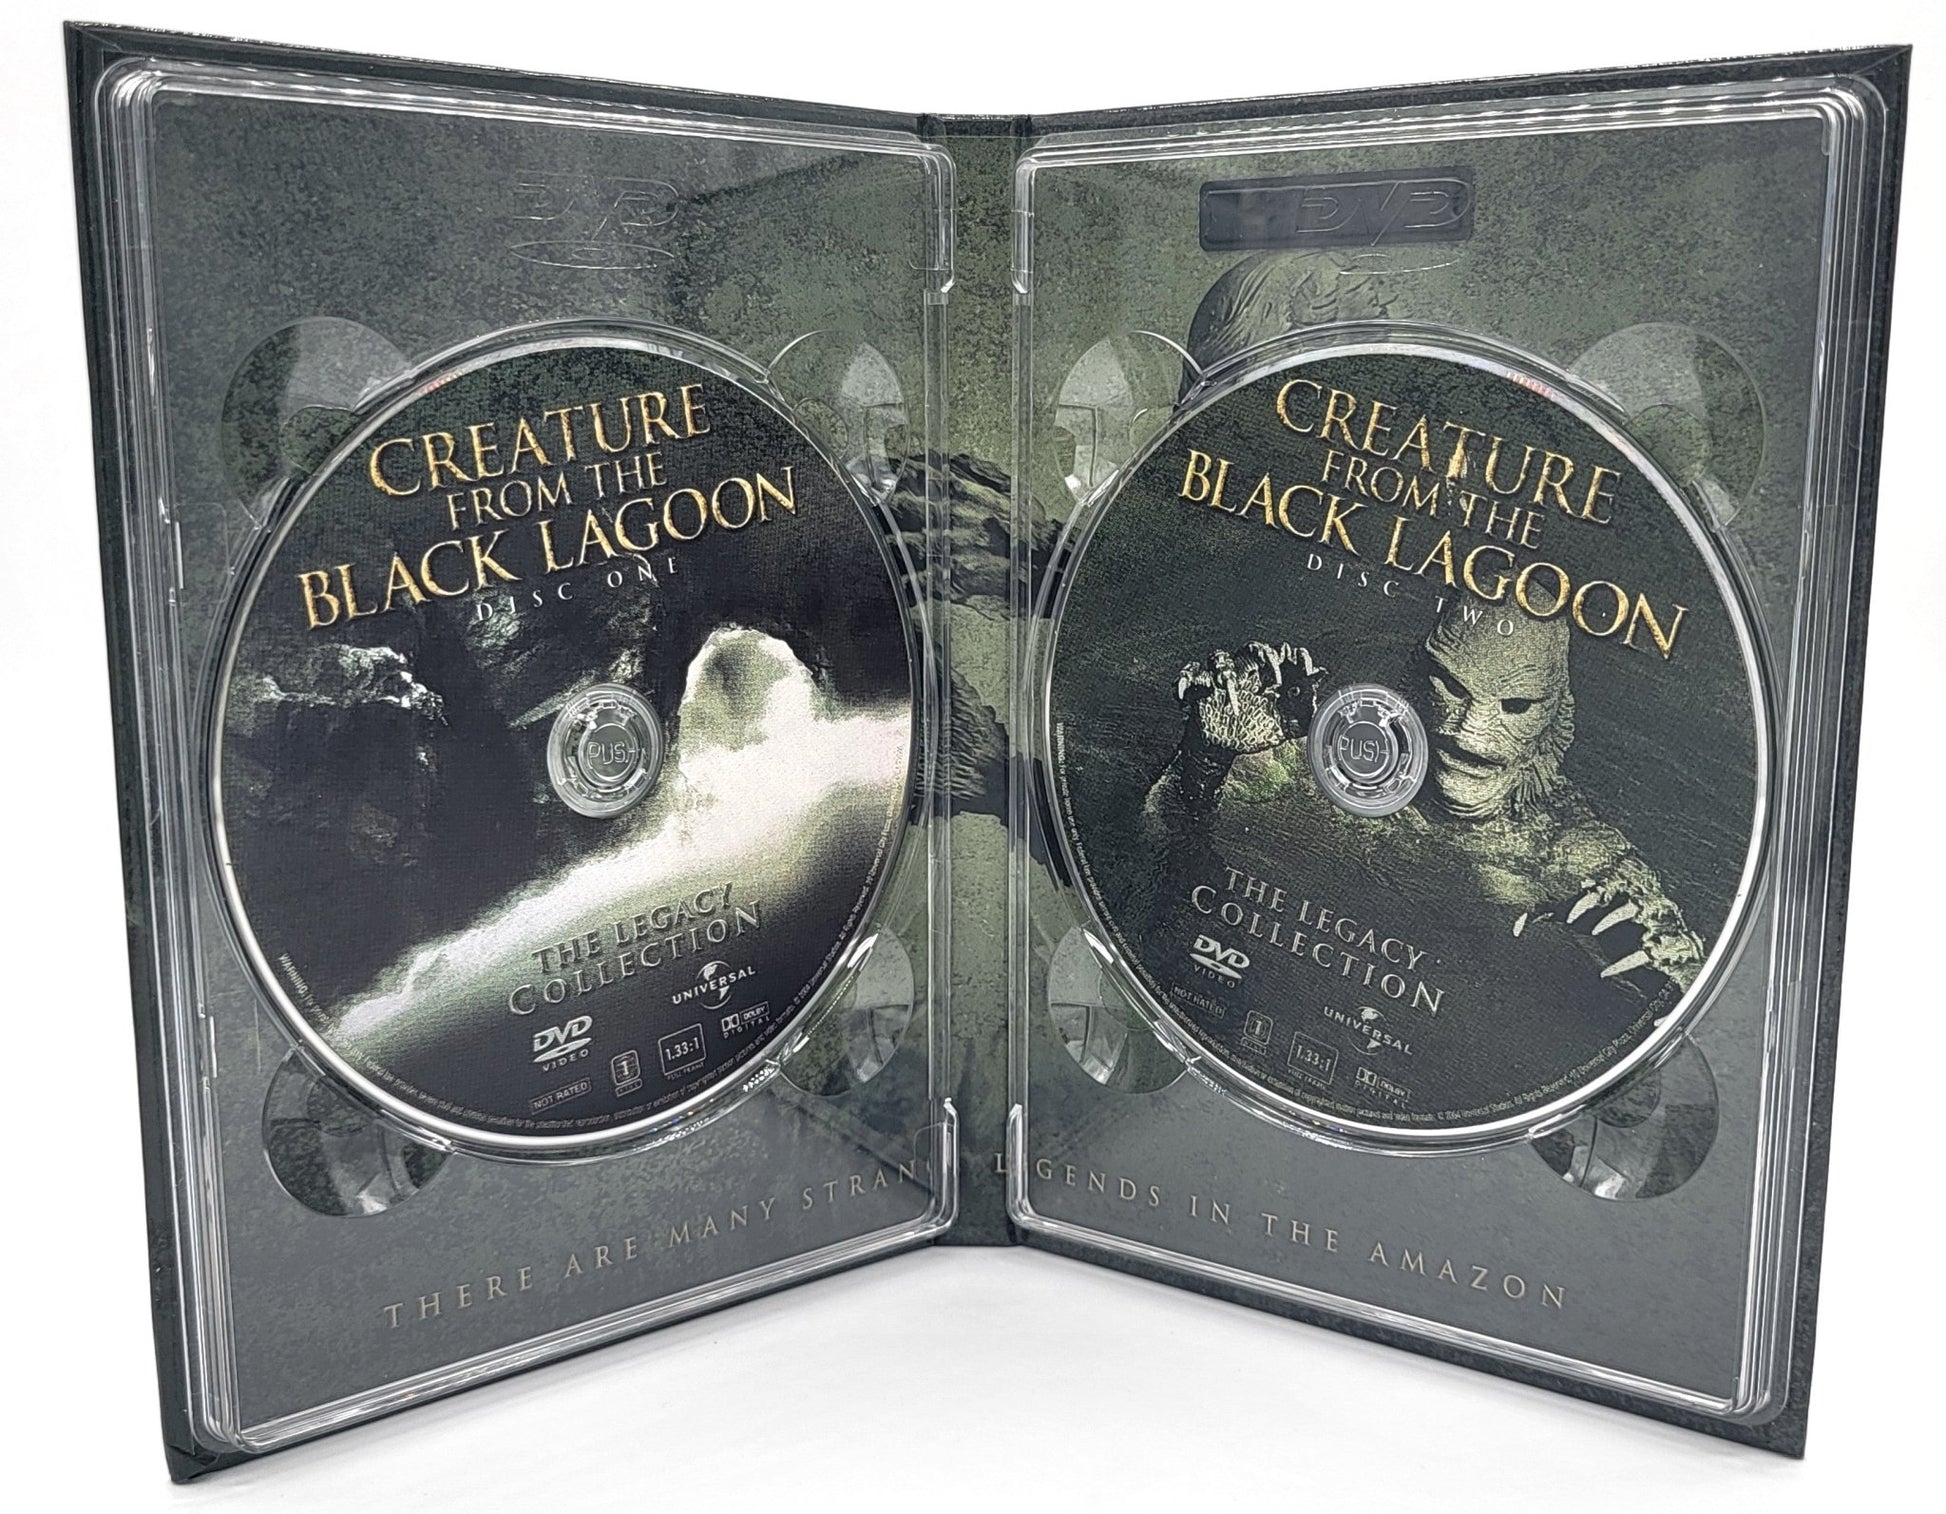 Universal Studios Home Entertainment - Creature From the Black Lagoon - Revenge of the Creature | DVD| The Legacy Collection - DVD - Steady Bunny Shop